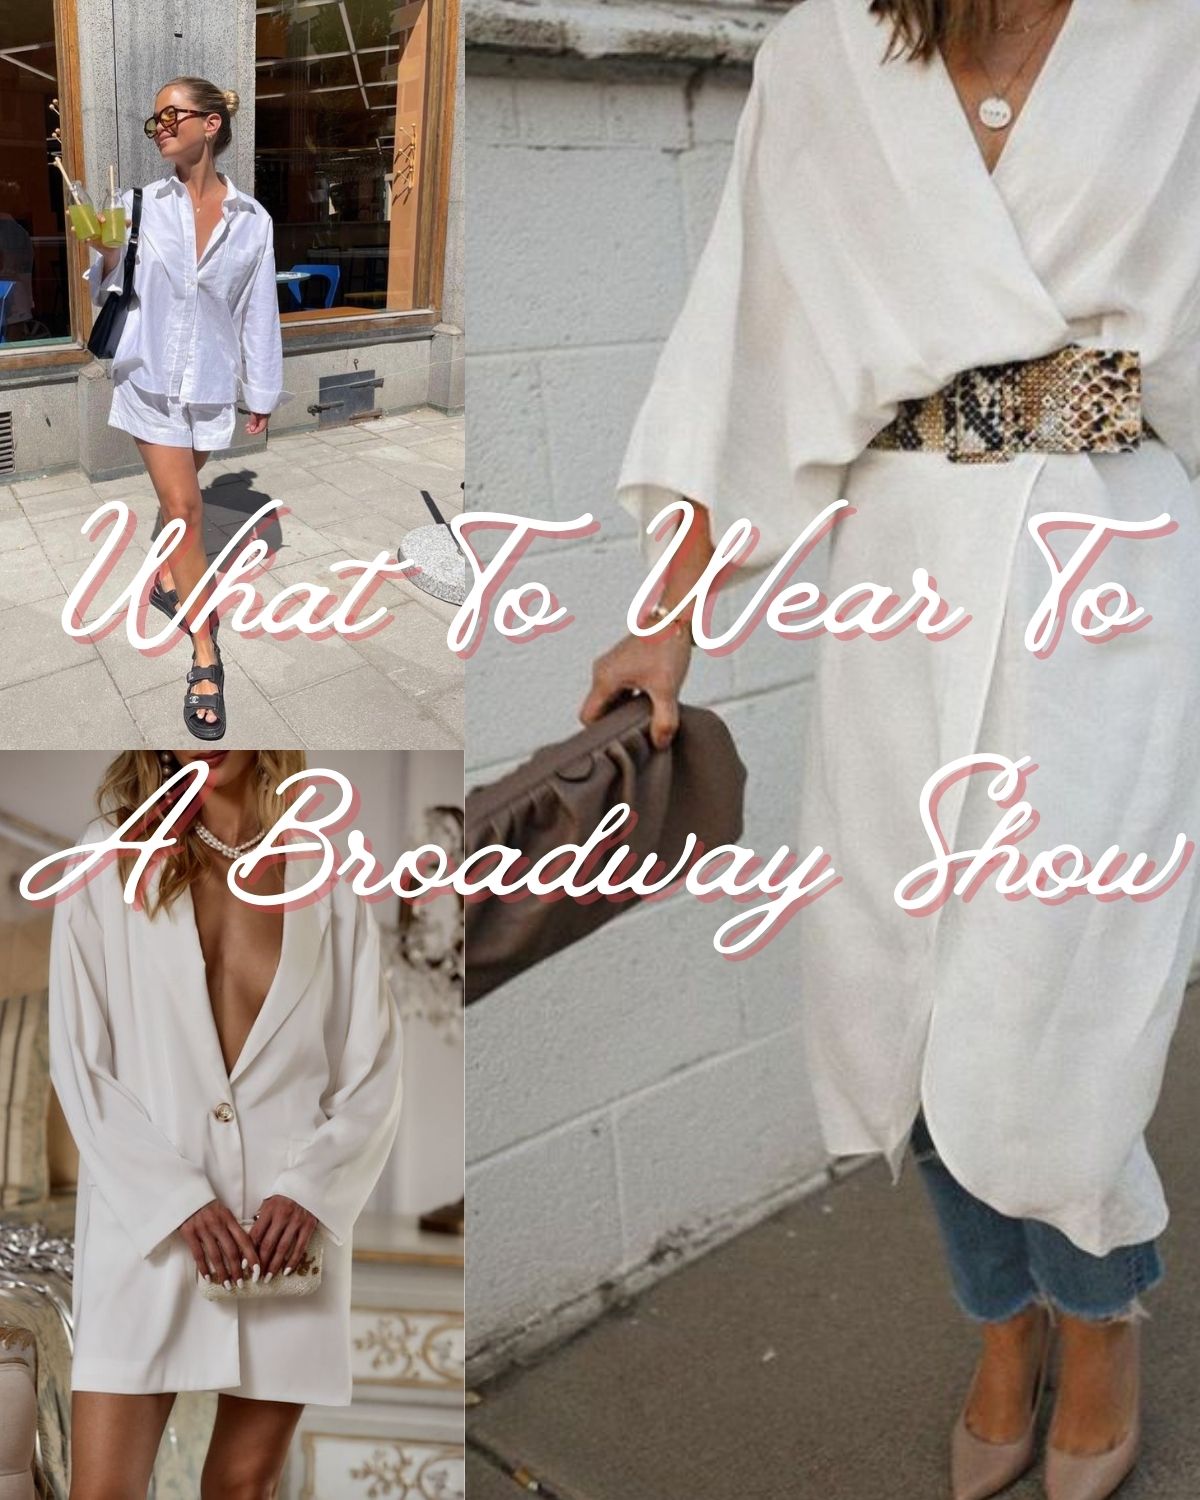 Three outfits that are cool for going to a broadway show